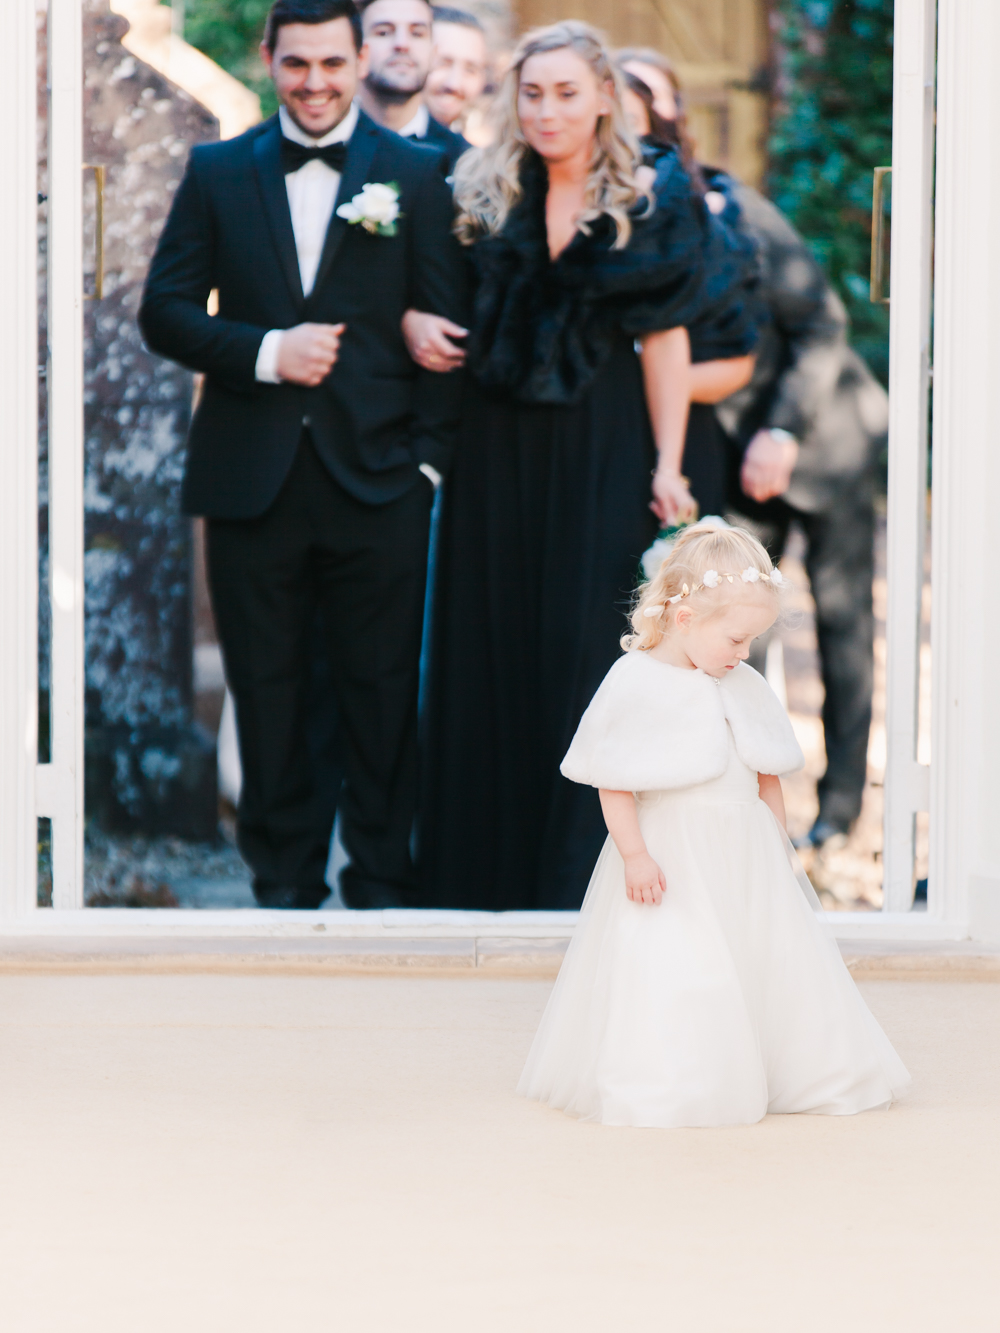 Shy little flower girl makes her way down the ceremony aisle